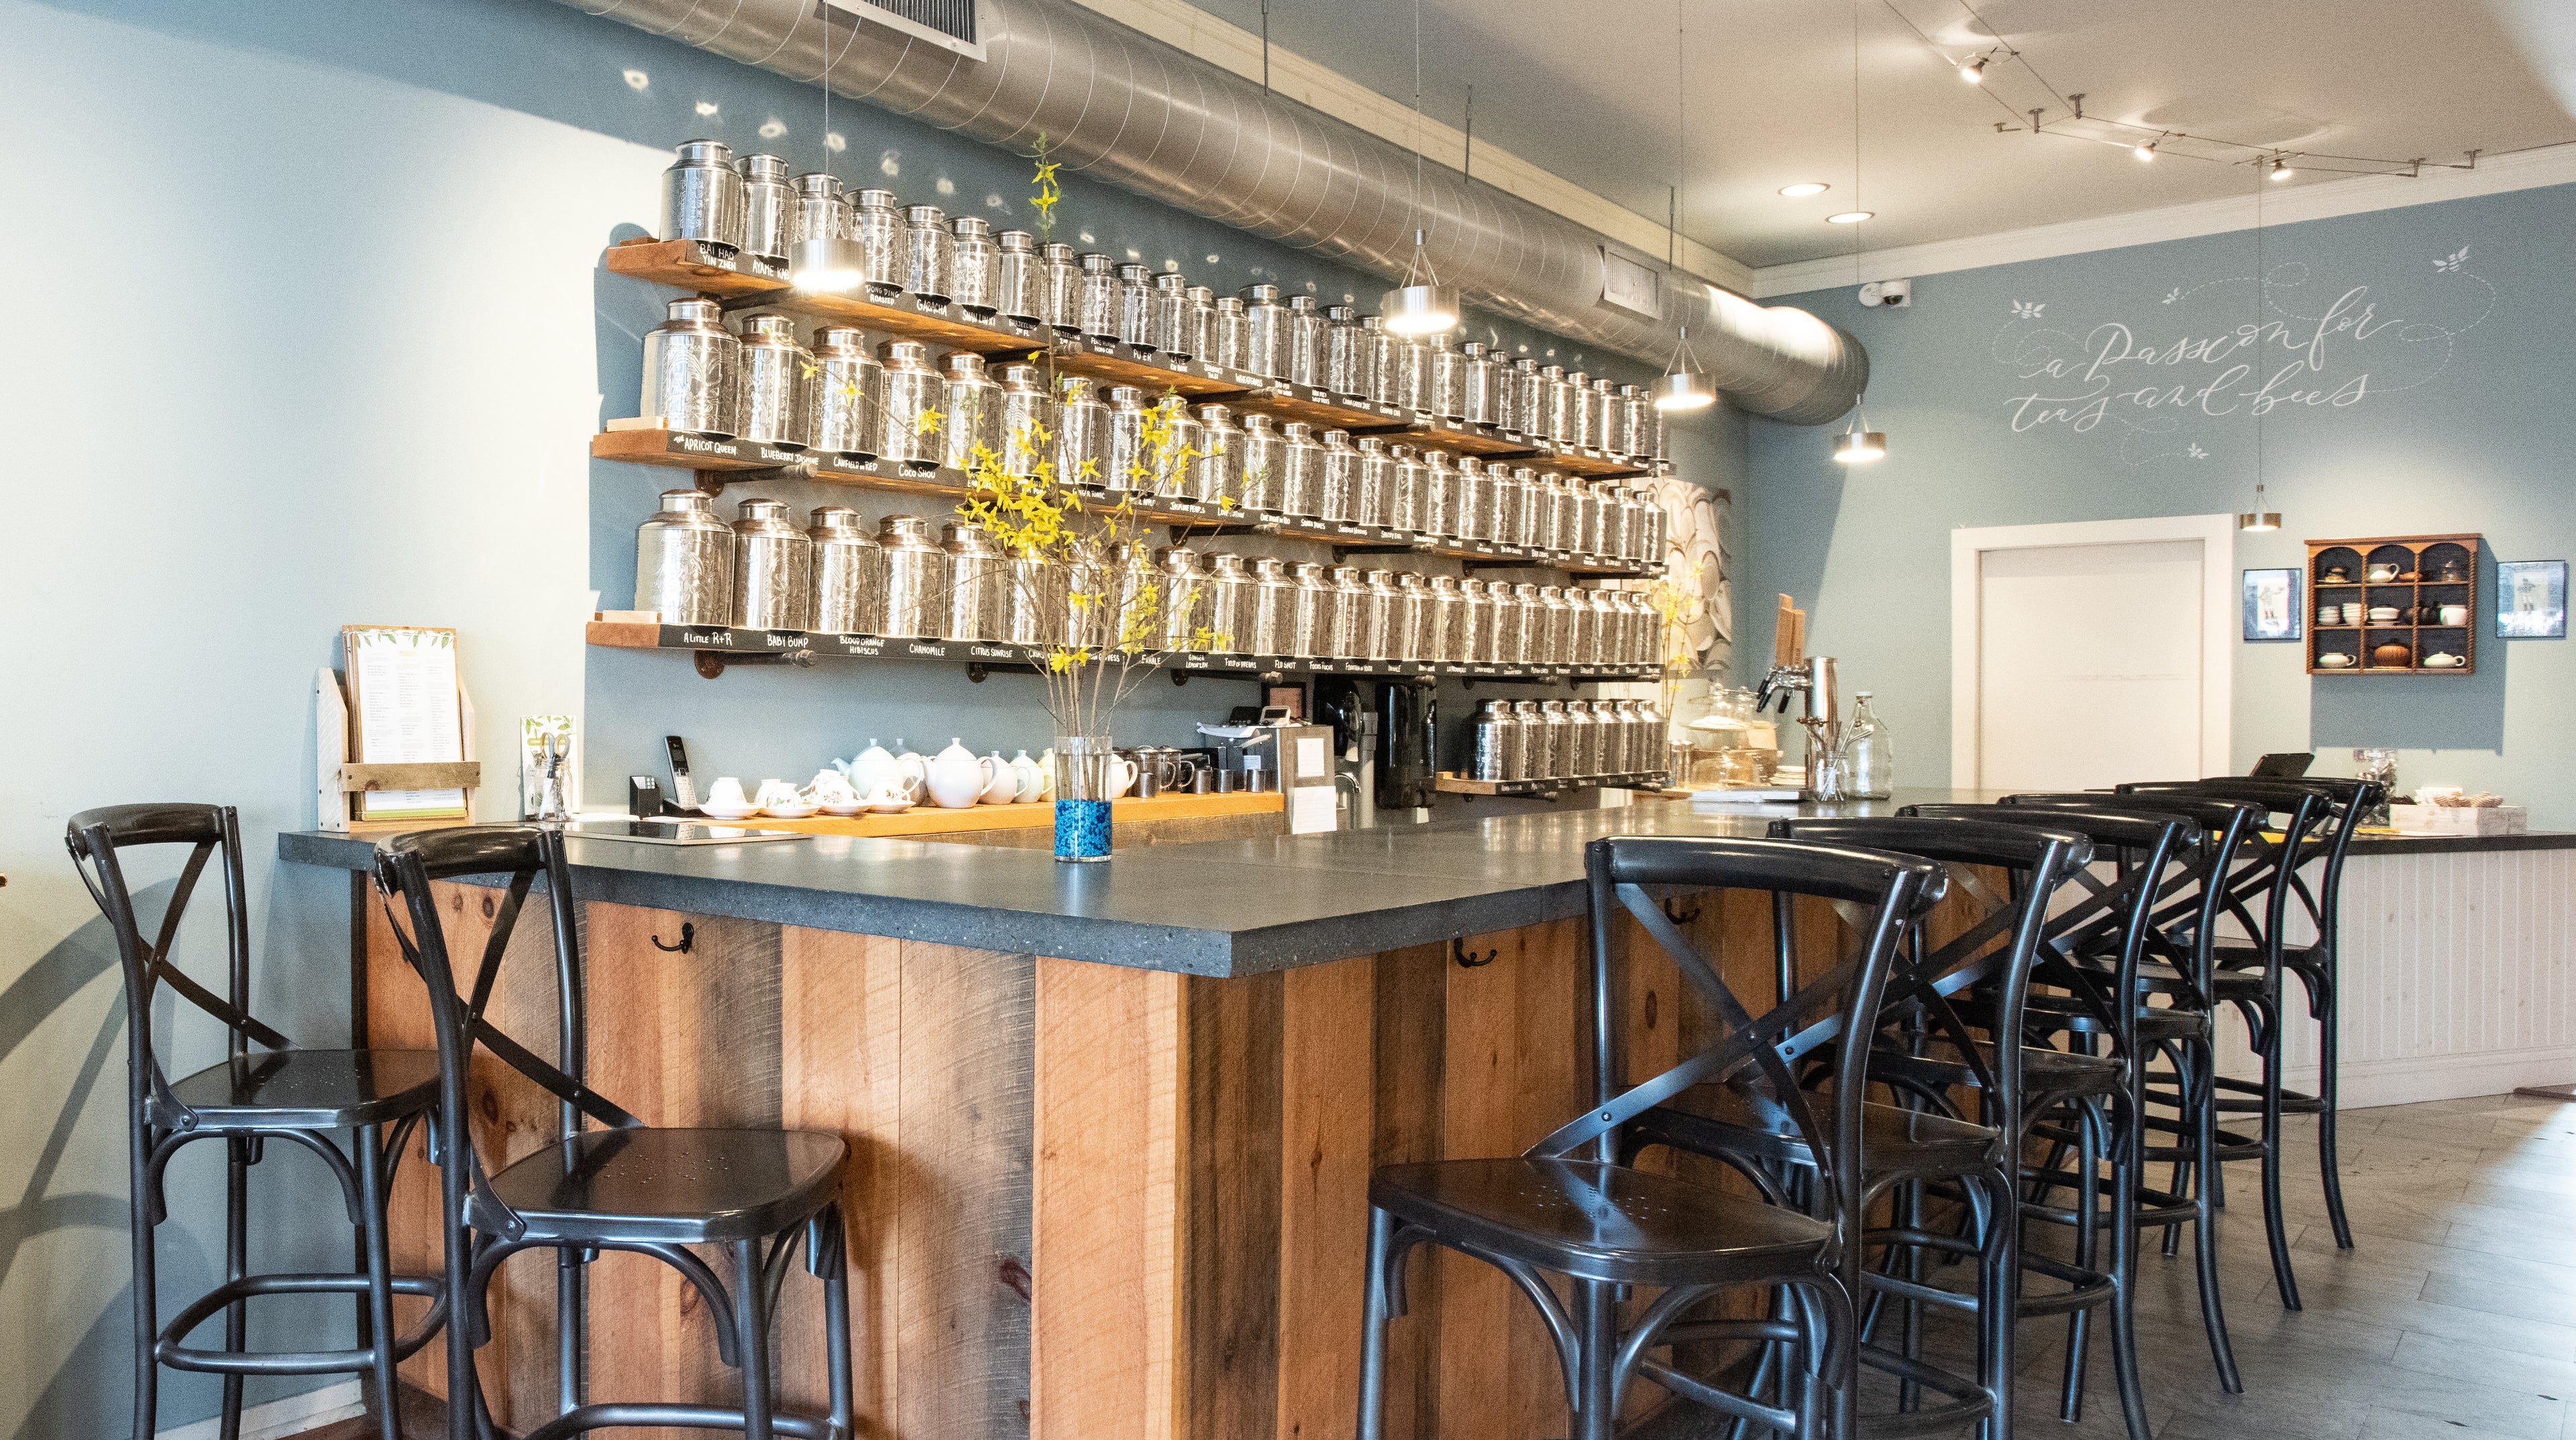 photo of the interior tea bar at Saratoga Tea & Honey Co. featuring 8 bar seats and a wall of silver tea canisters